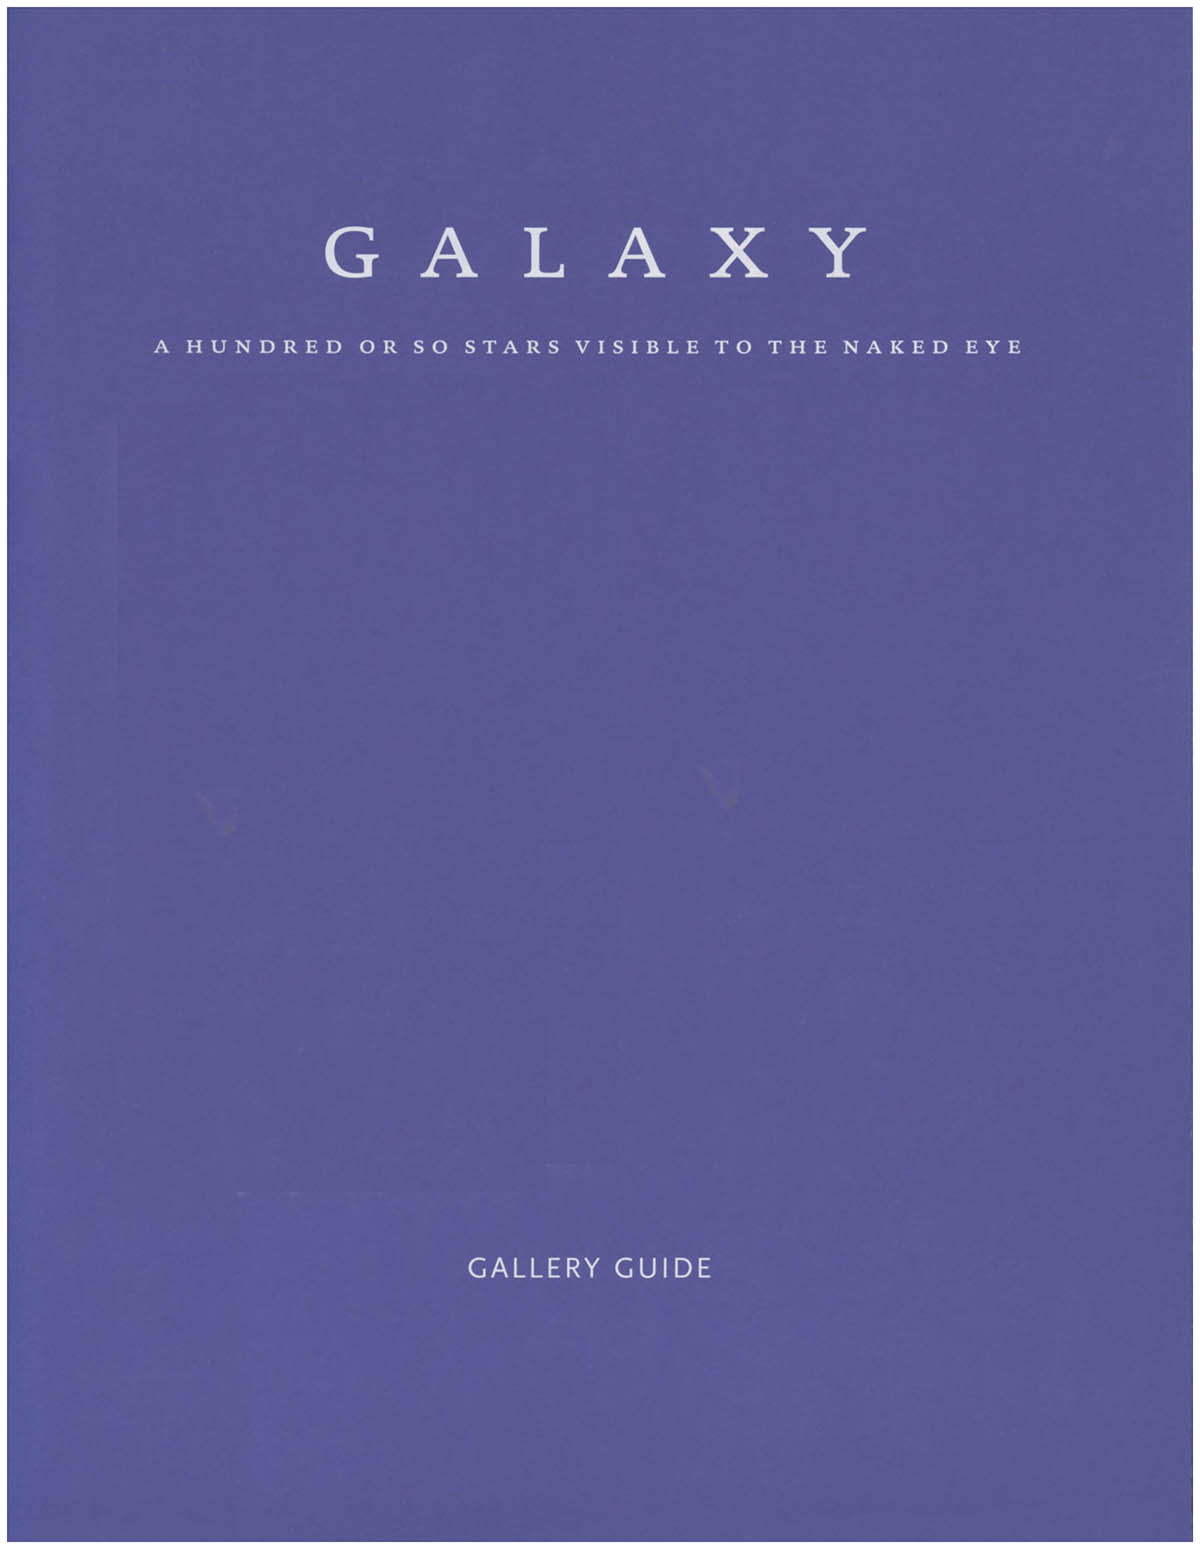 Berkeley Art Museum/Pacific Film Archive - Gallery Guide: Galaxy: A Hundred or So Stars Visible to the Naked Eye (February 25